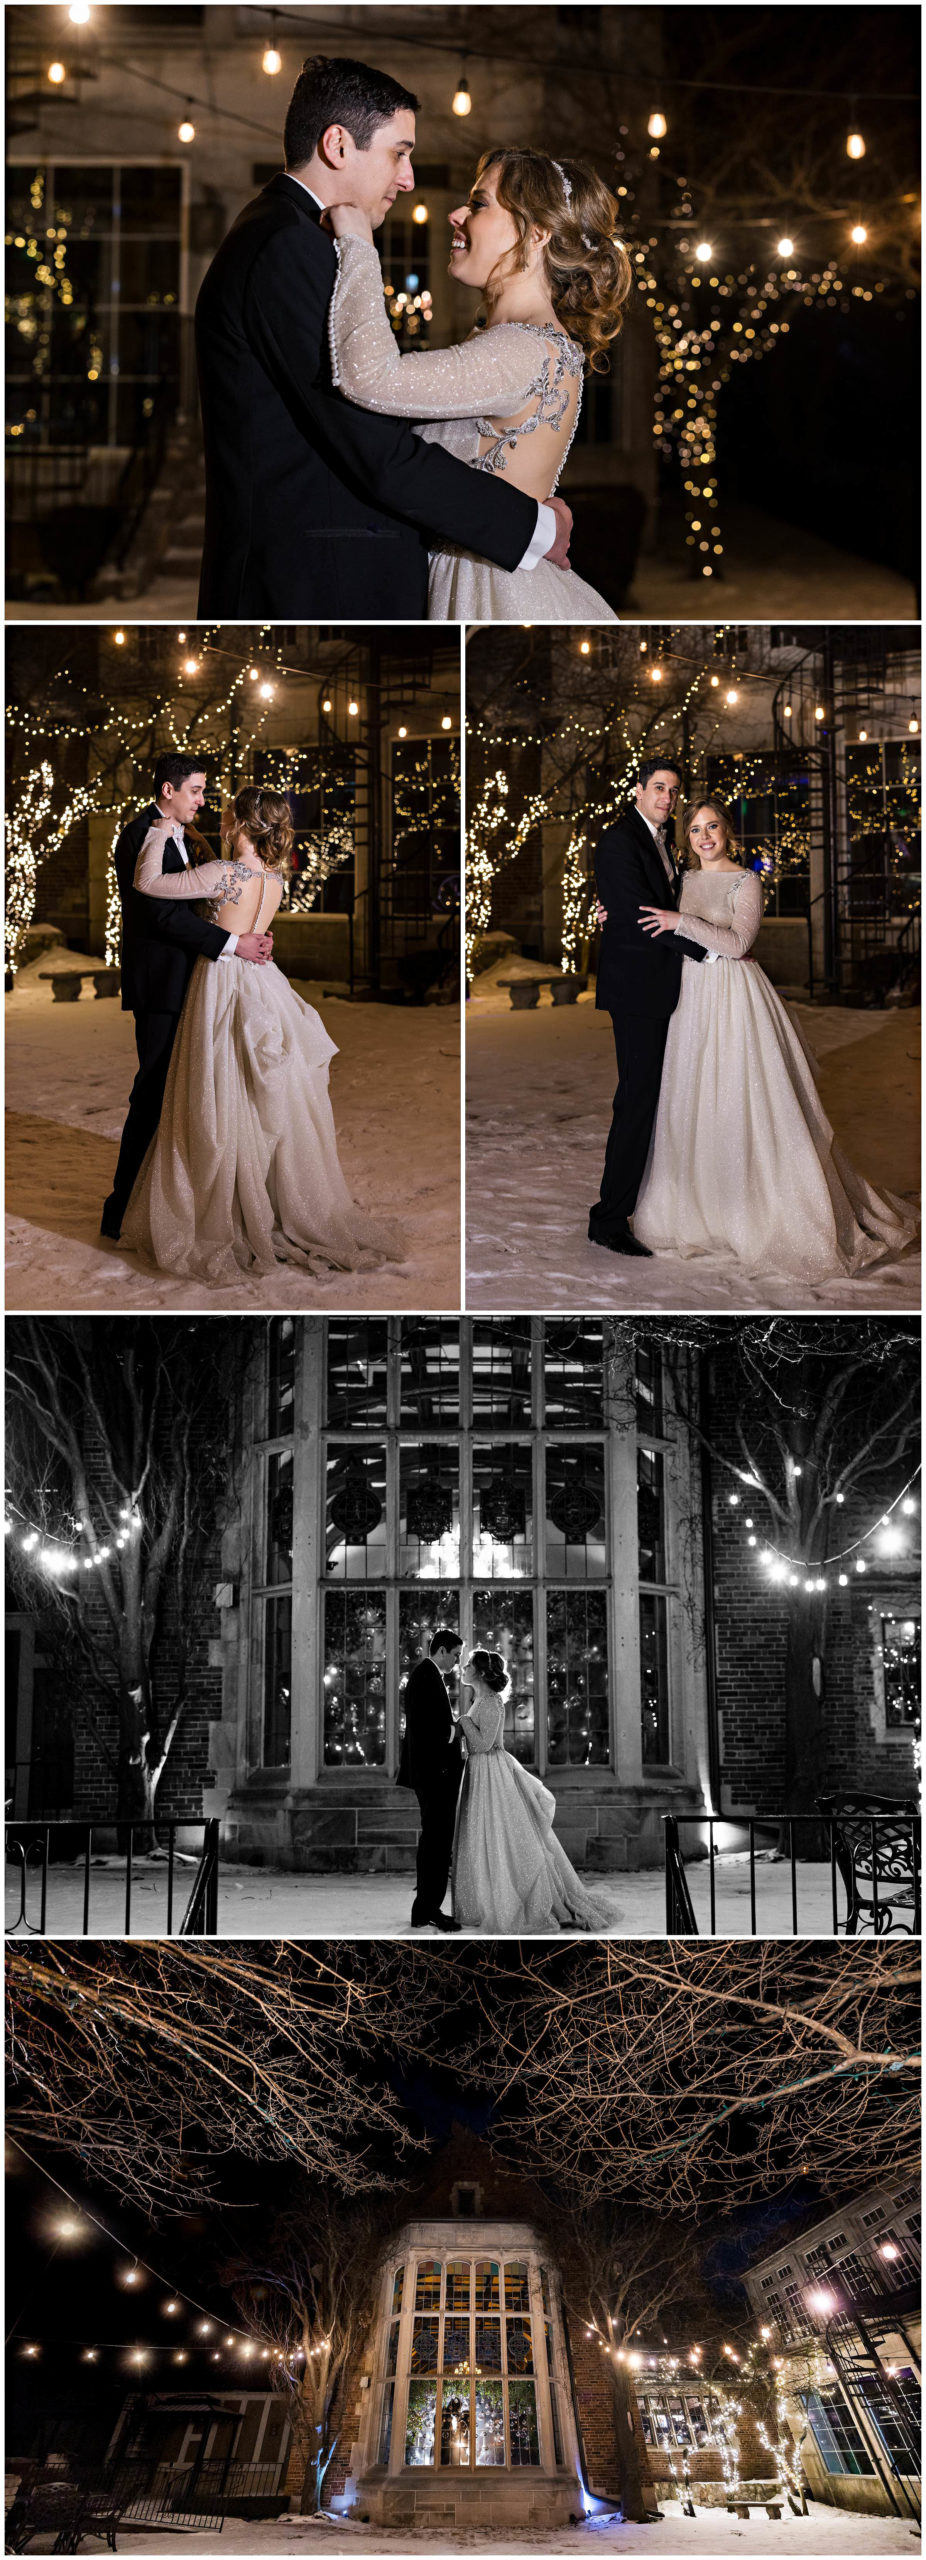 Bride and groom smile at each other outside for evening photos with twinkling lights and snow; outside shot of bride and groom embracing in the window of the Pine Knob Mansion by Detroit Wedding Photographer Michele Maloney 